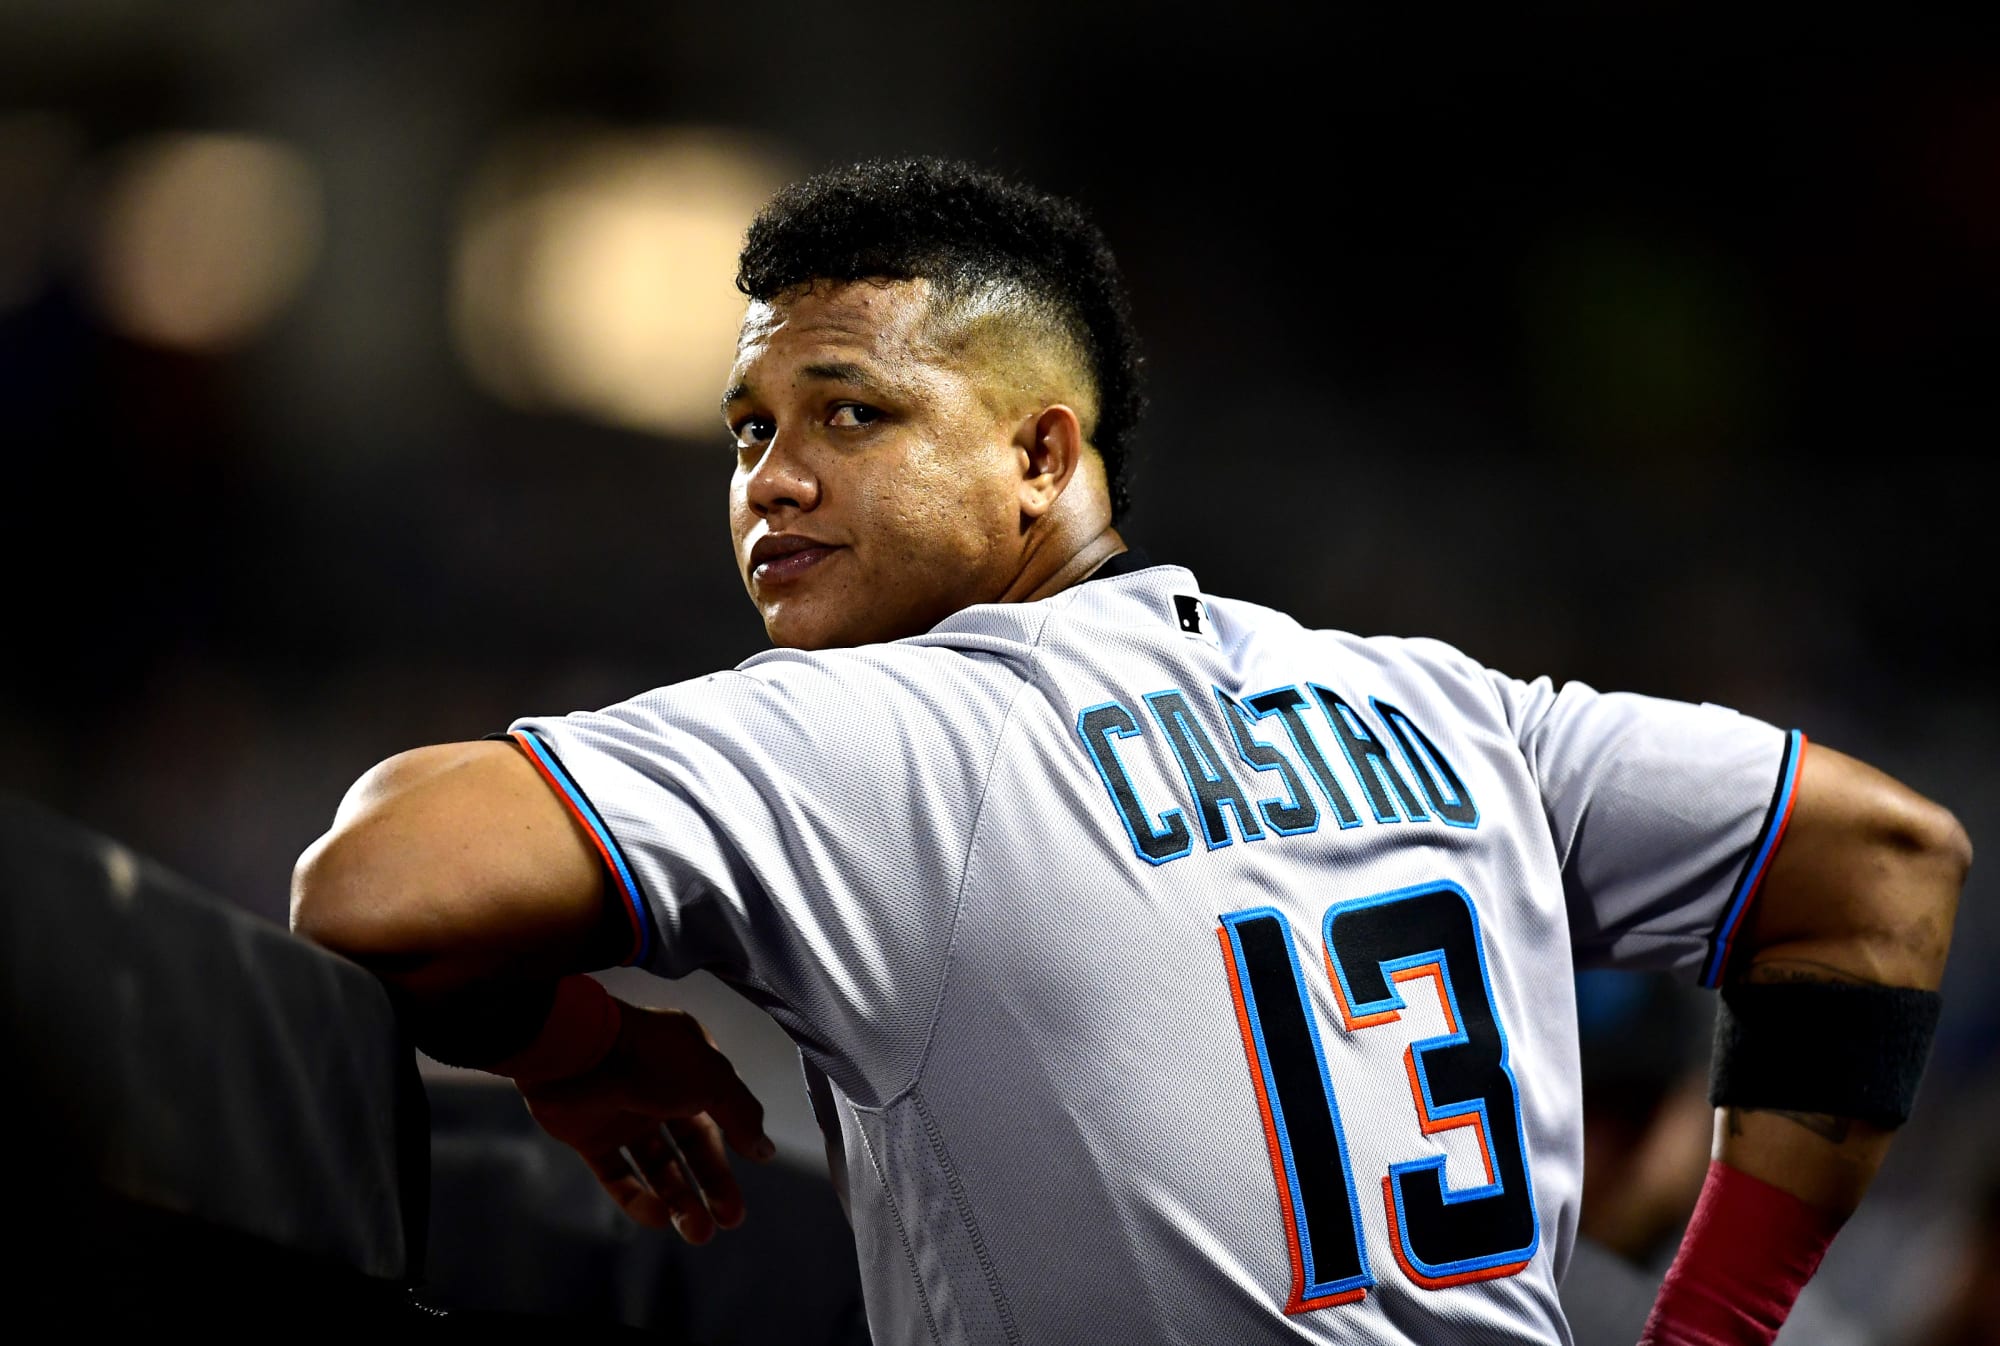 Starlin Castro paying it forward to Gleyber Torres after learning